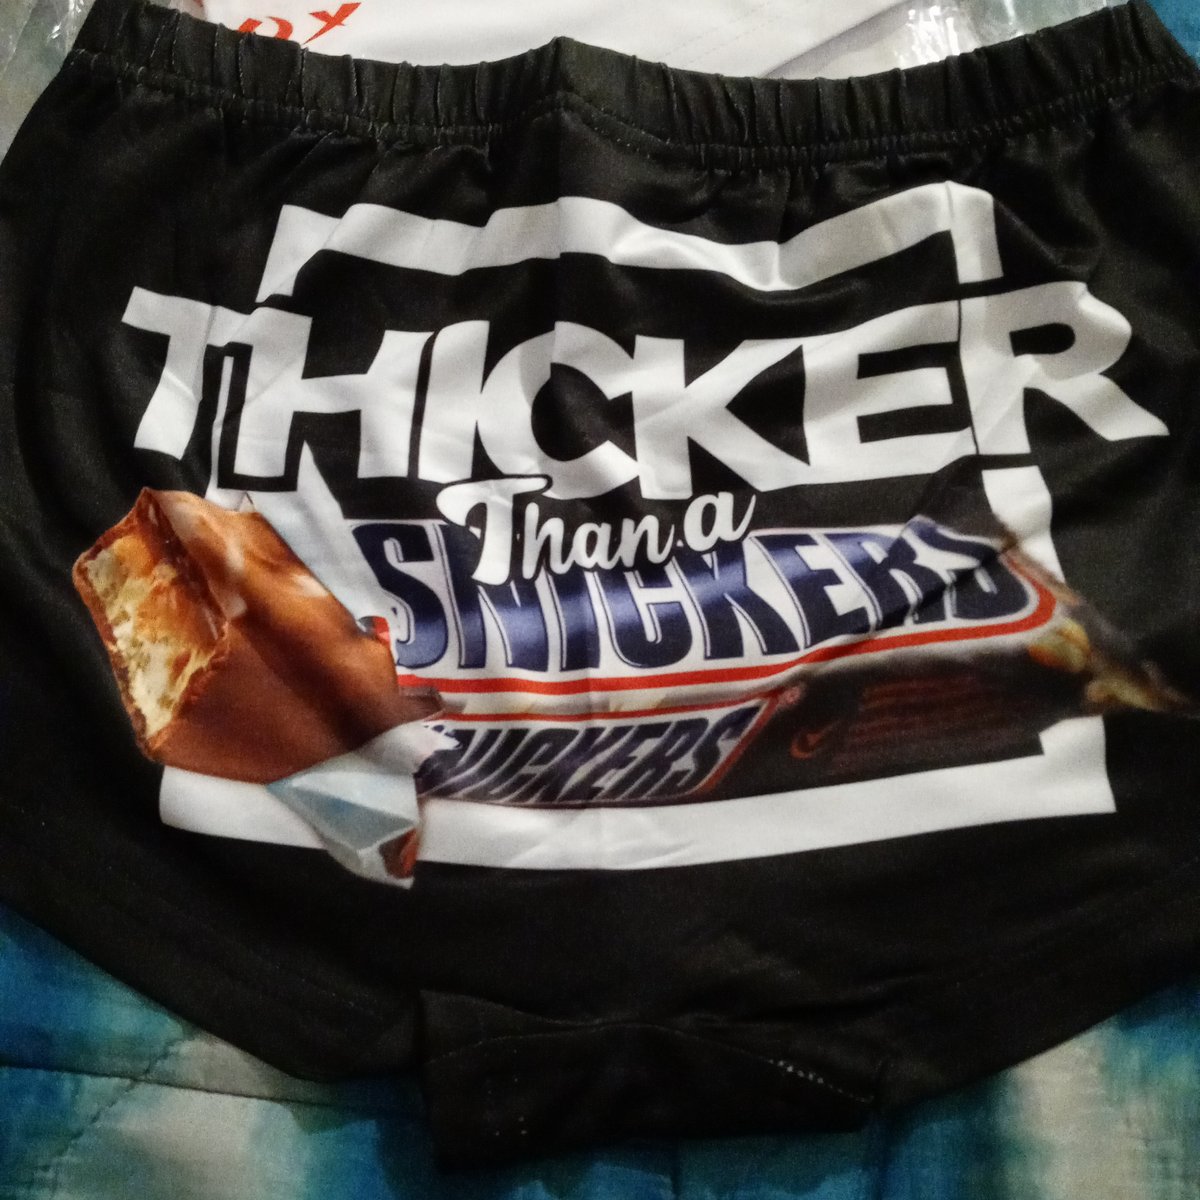 Thicker than a snickers